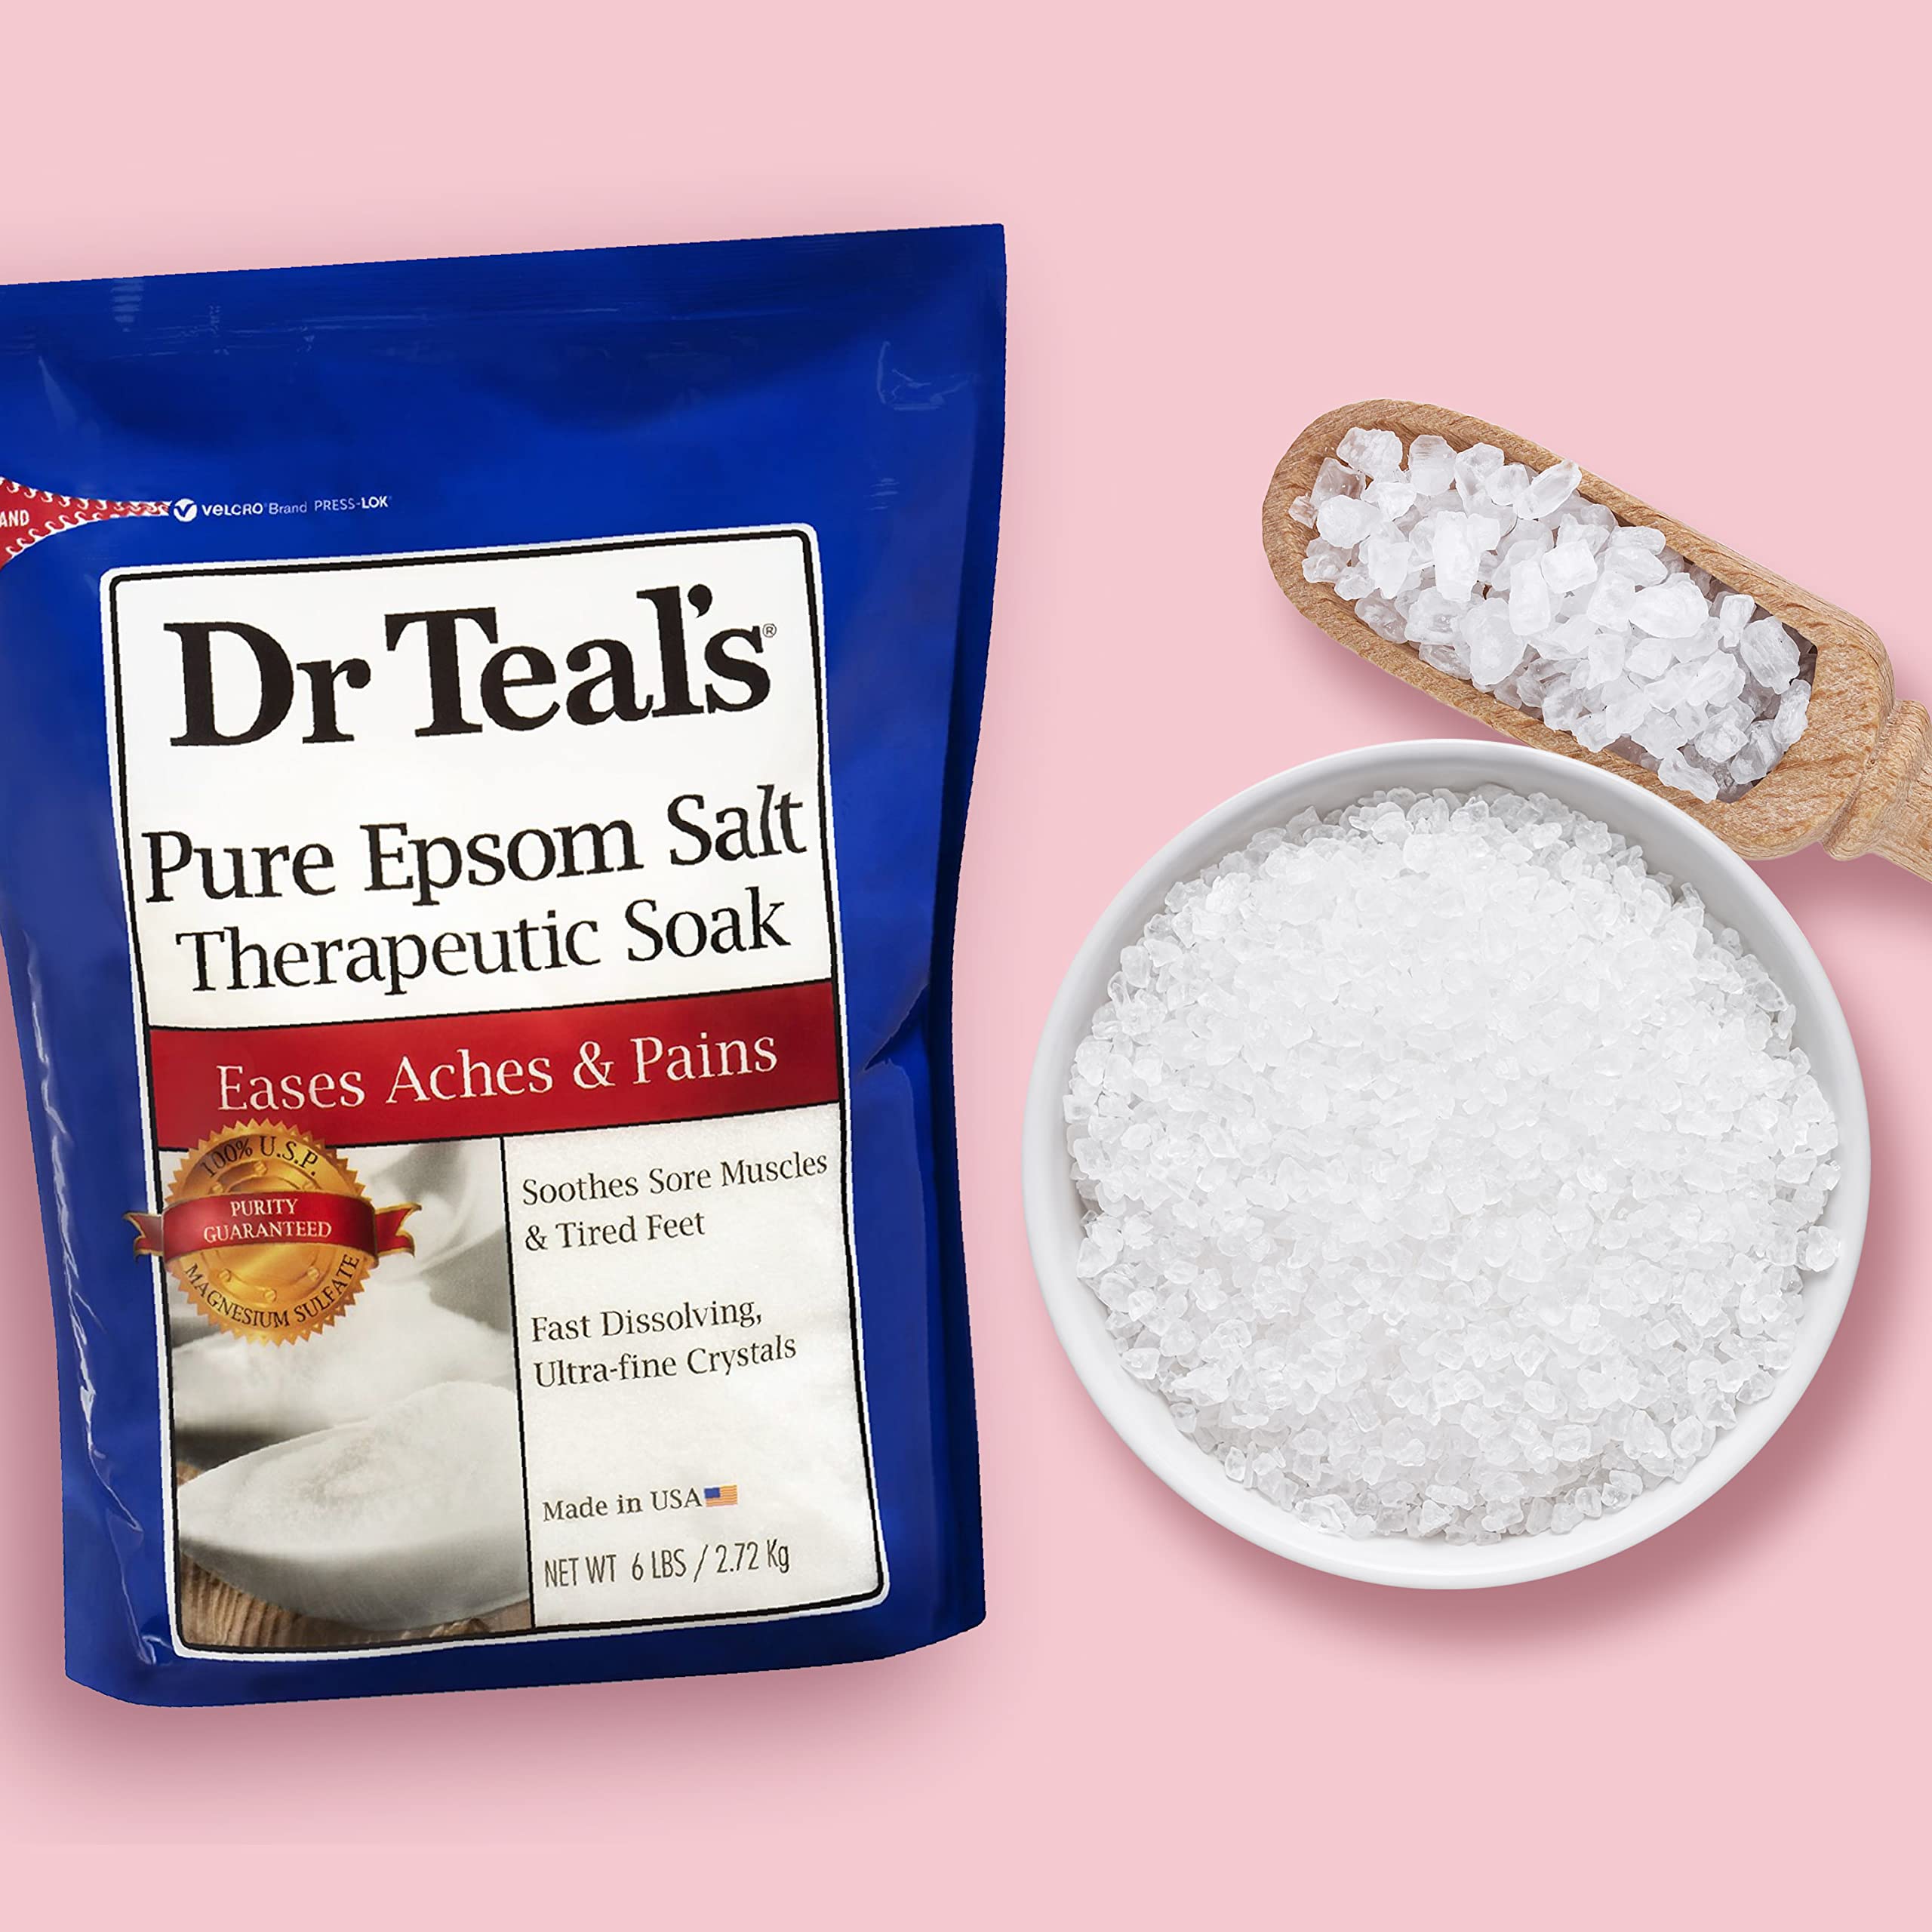 Dr Teal's Unscented Epsom Salt Bulk Magnesium Sulfate USP, 6 lbs (Pack of 6) 36 lbs Total (Packaging May Vary)